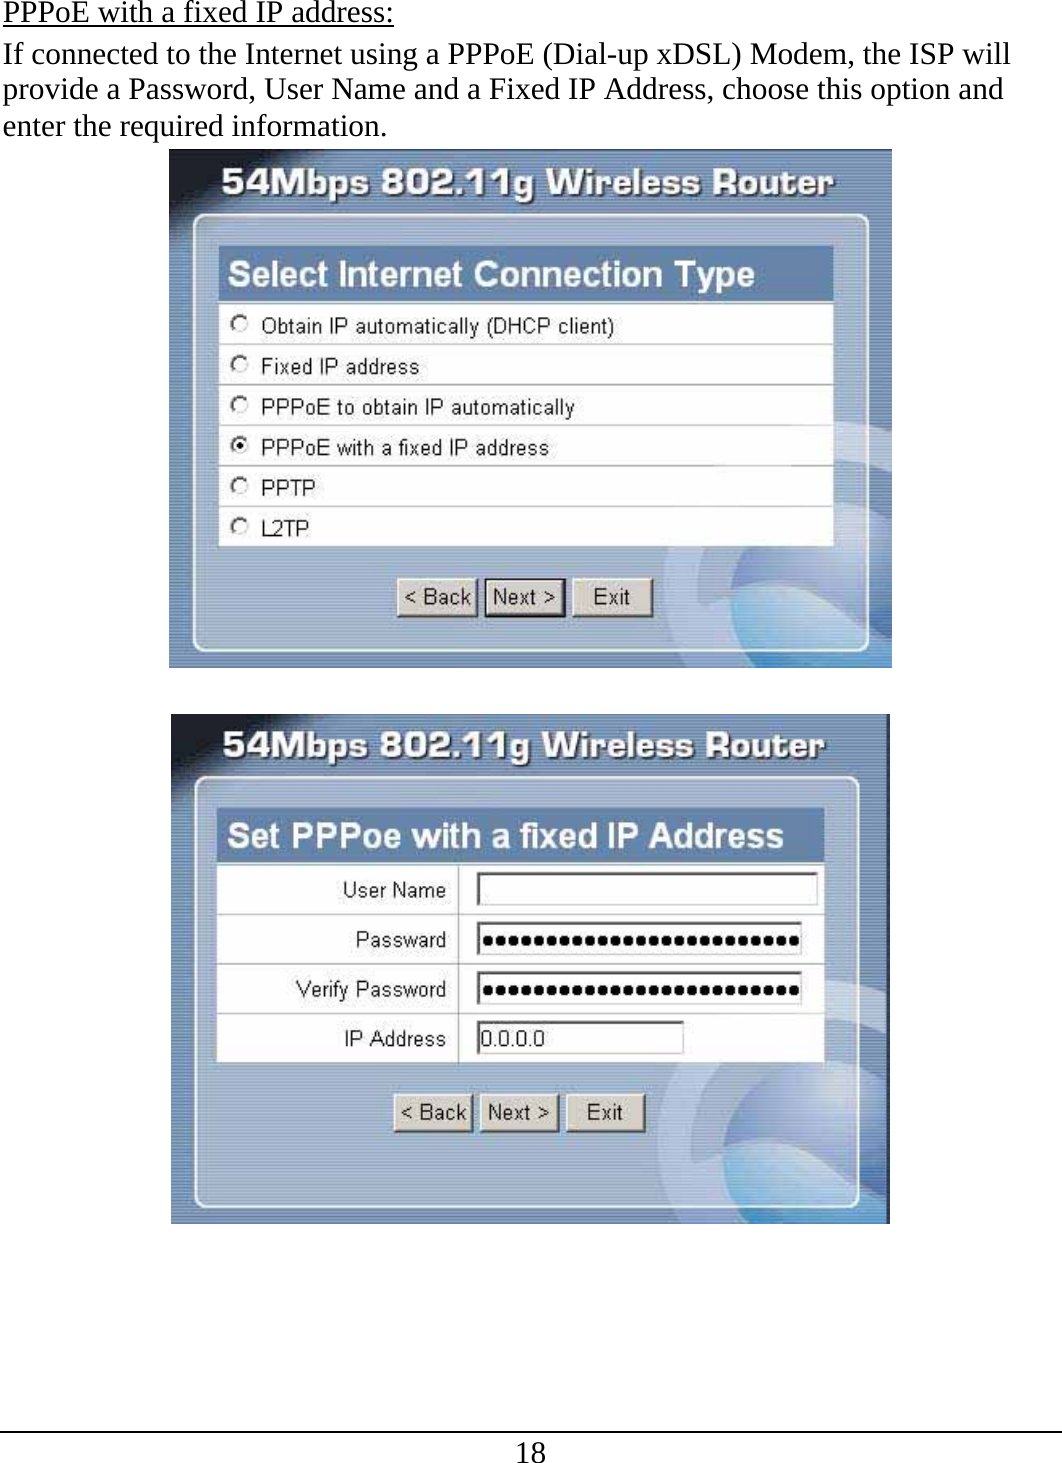 18 PPPoE with a fixed IP address: If connected to the Internet using a PPPoE (Dial-up xDSL) Modem, the ISP will provide a Password, User Name and a Fixed IP Address, choose this option and enter the required information.    